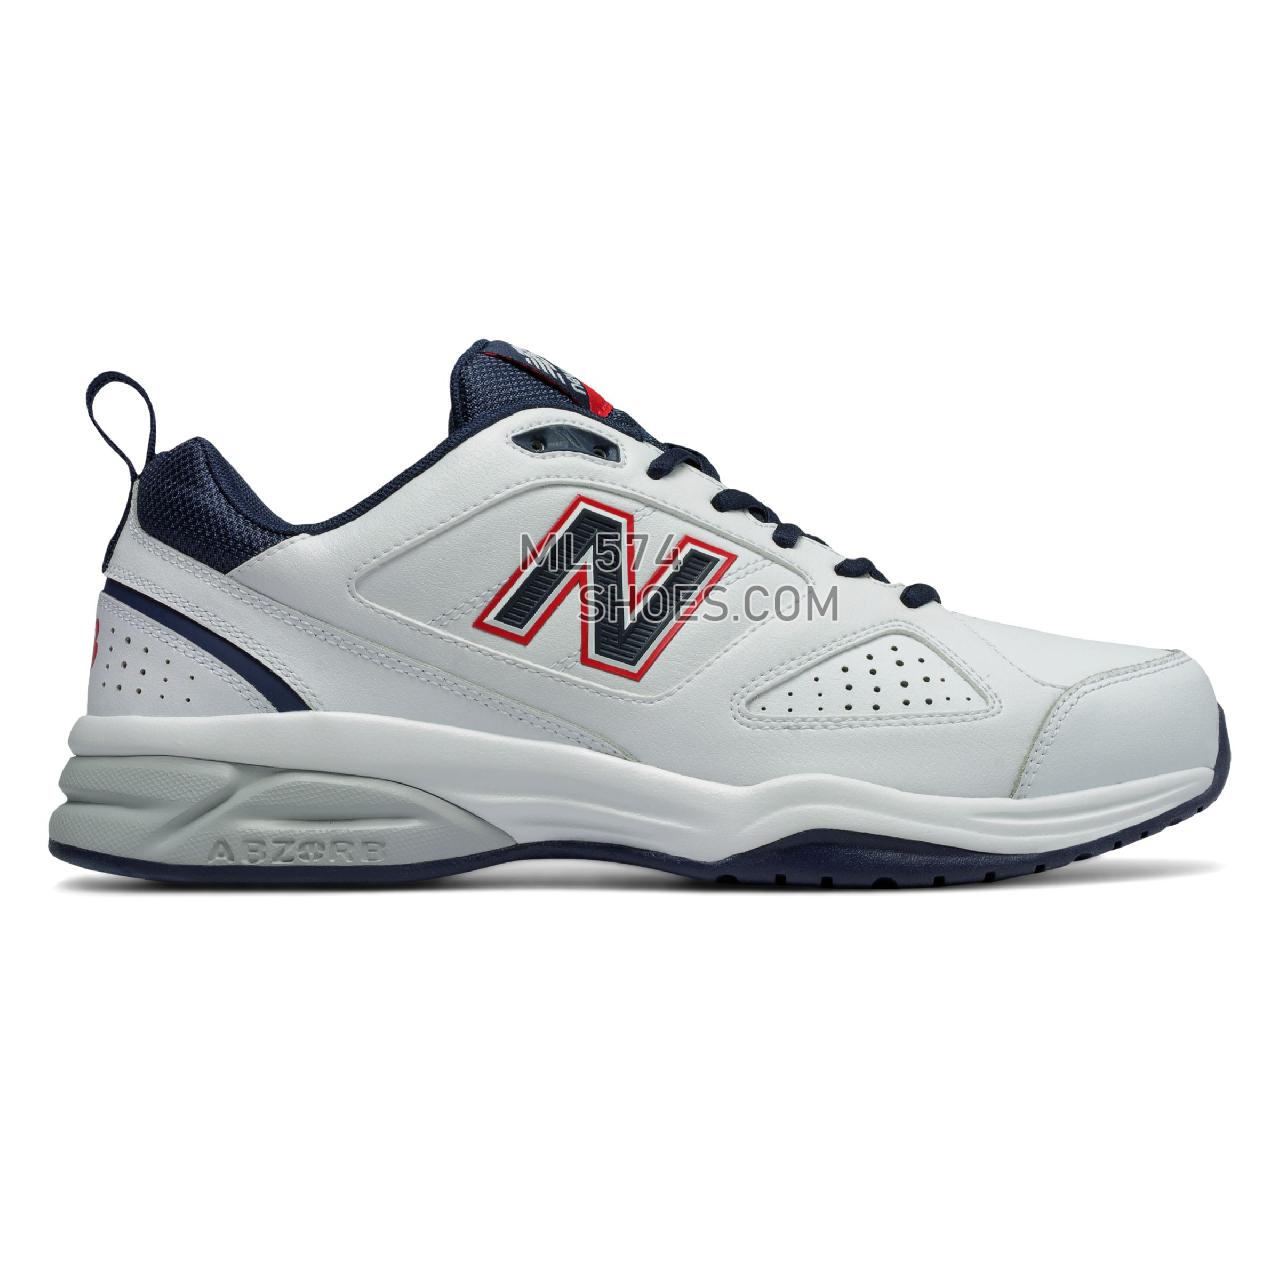 New Balance New Balance 623v3 Trainer - Men's 623 - X-training White with Navy and Red - MX623US3